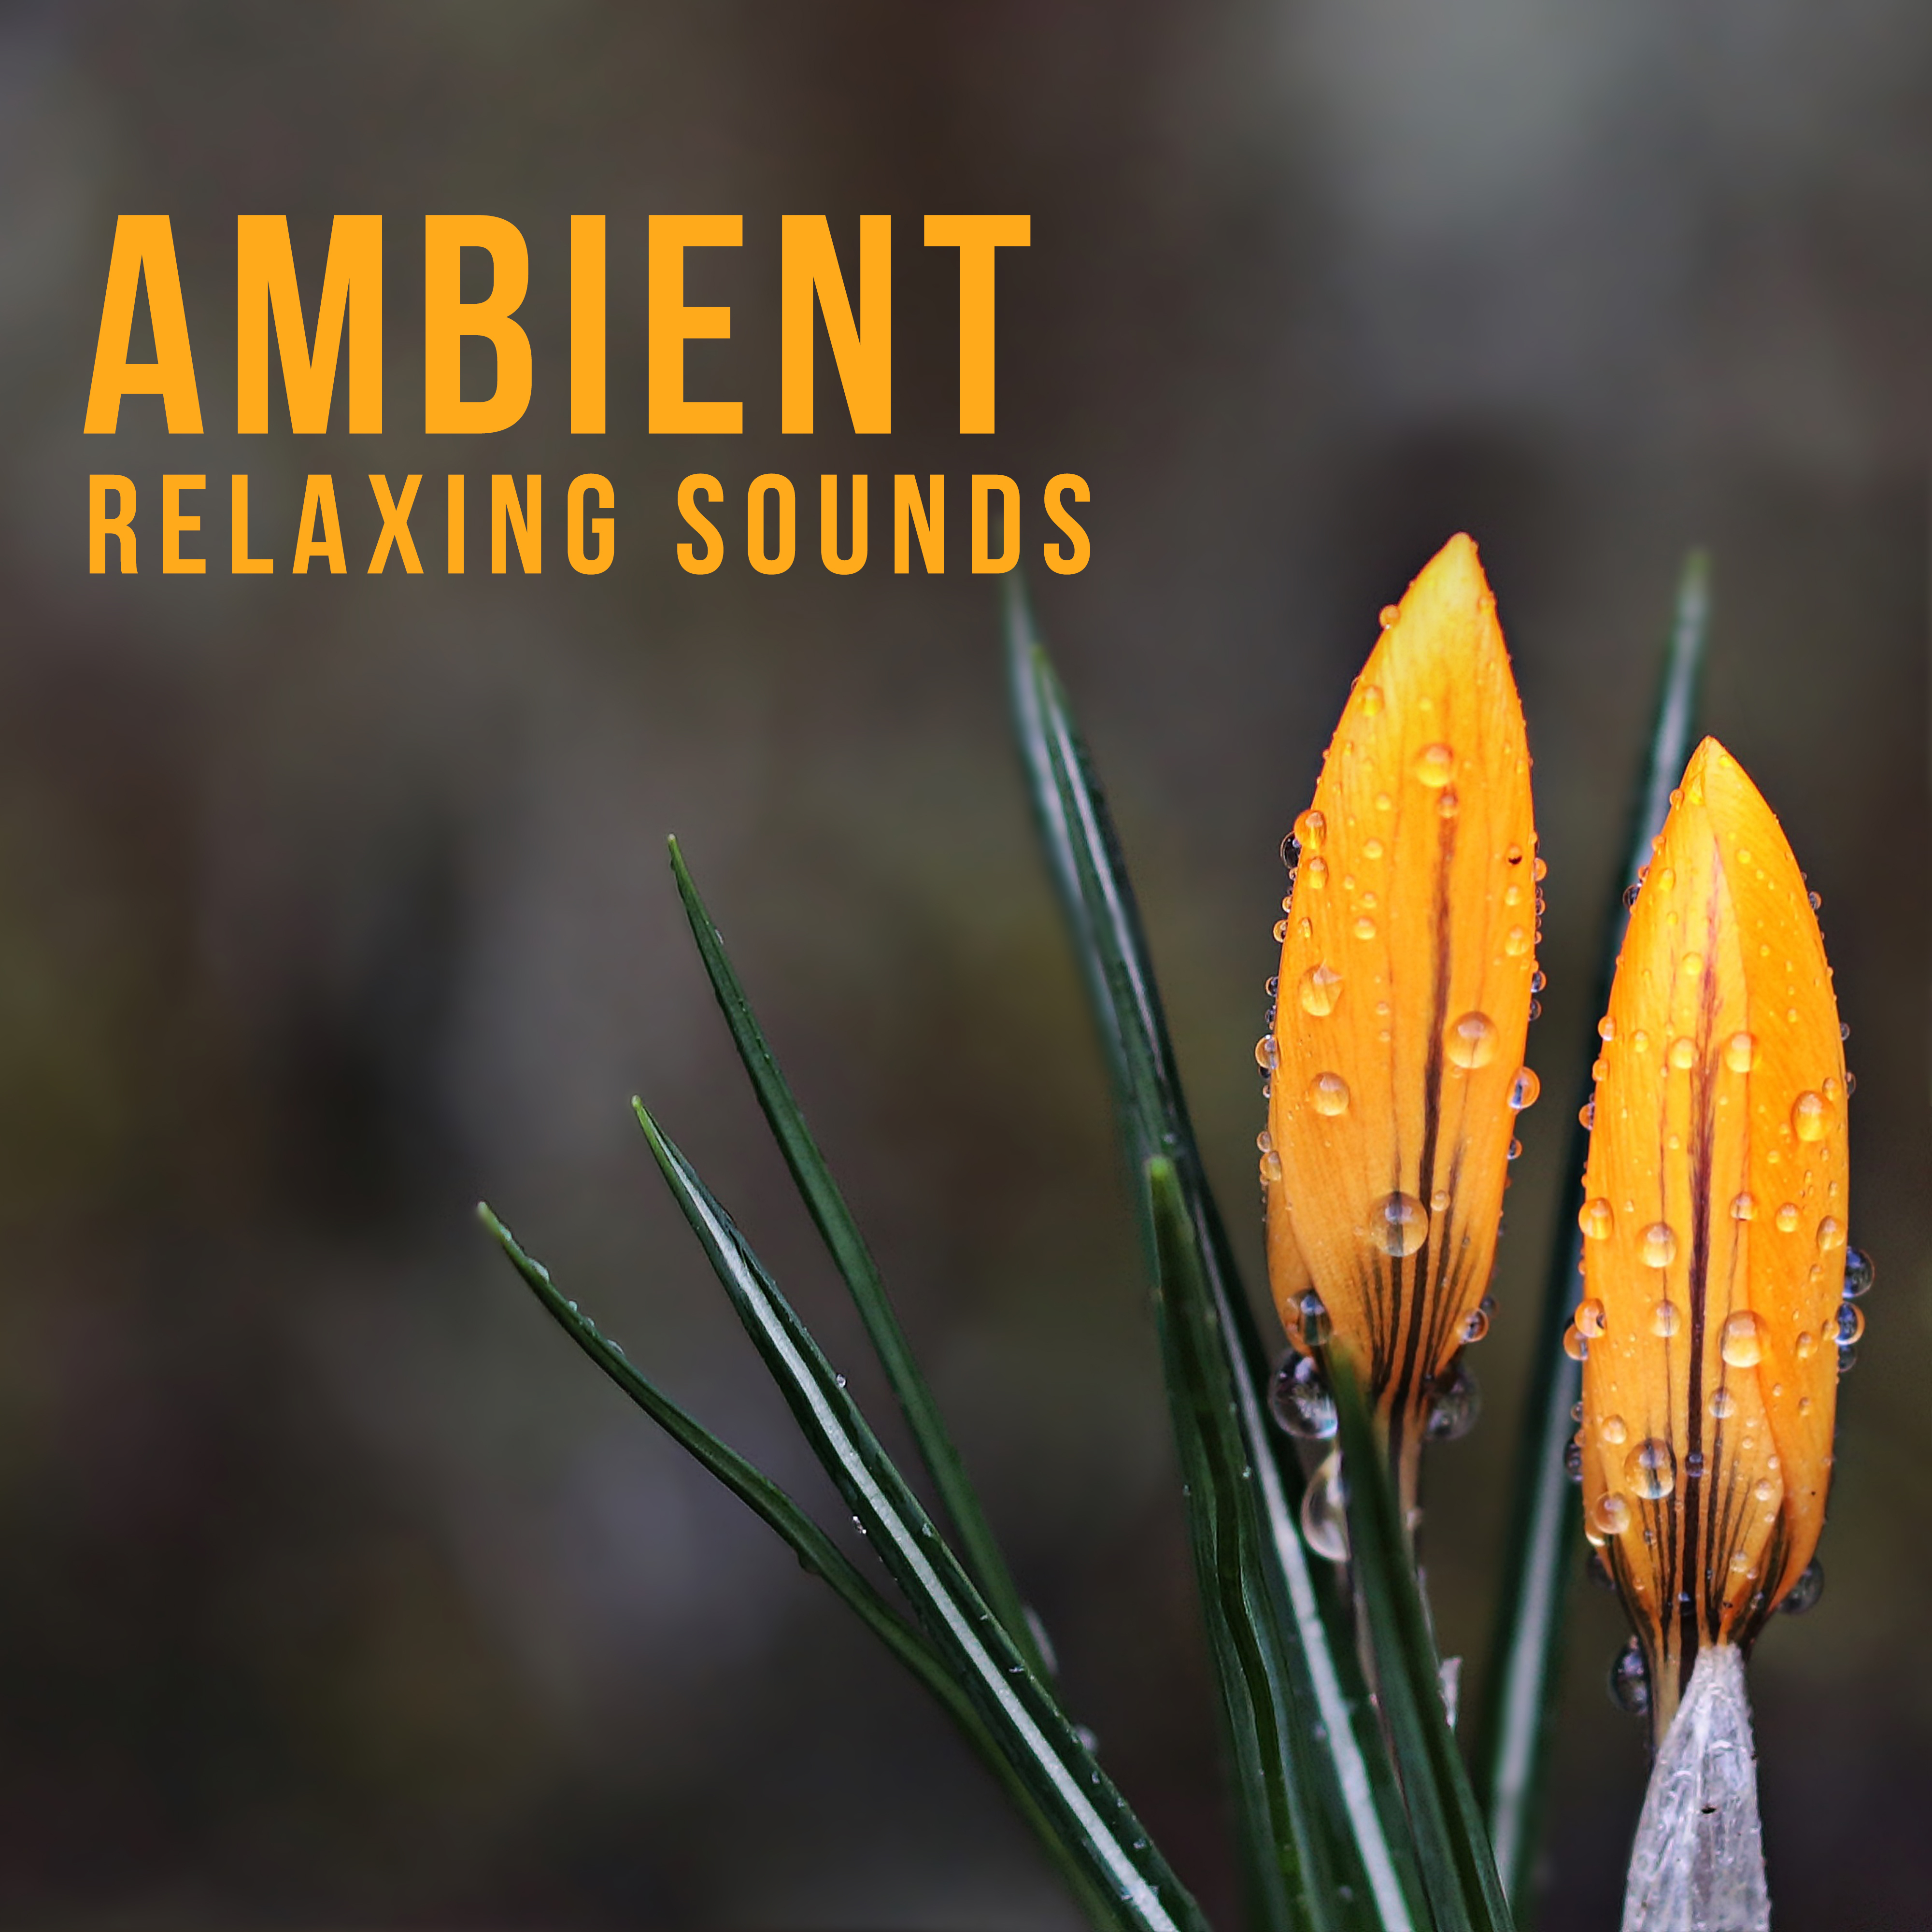 Ambient Relaxing Sounds  Relaxing Music for Lazy Day, Soothing New Age Sounds, Rest Your Mind, Soul Harmony